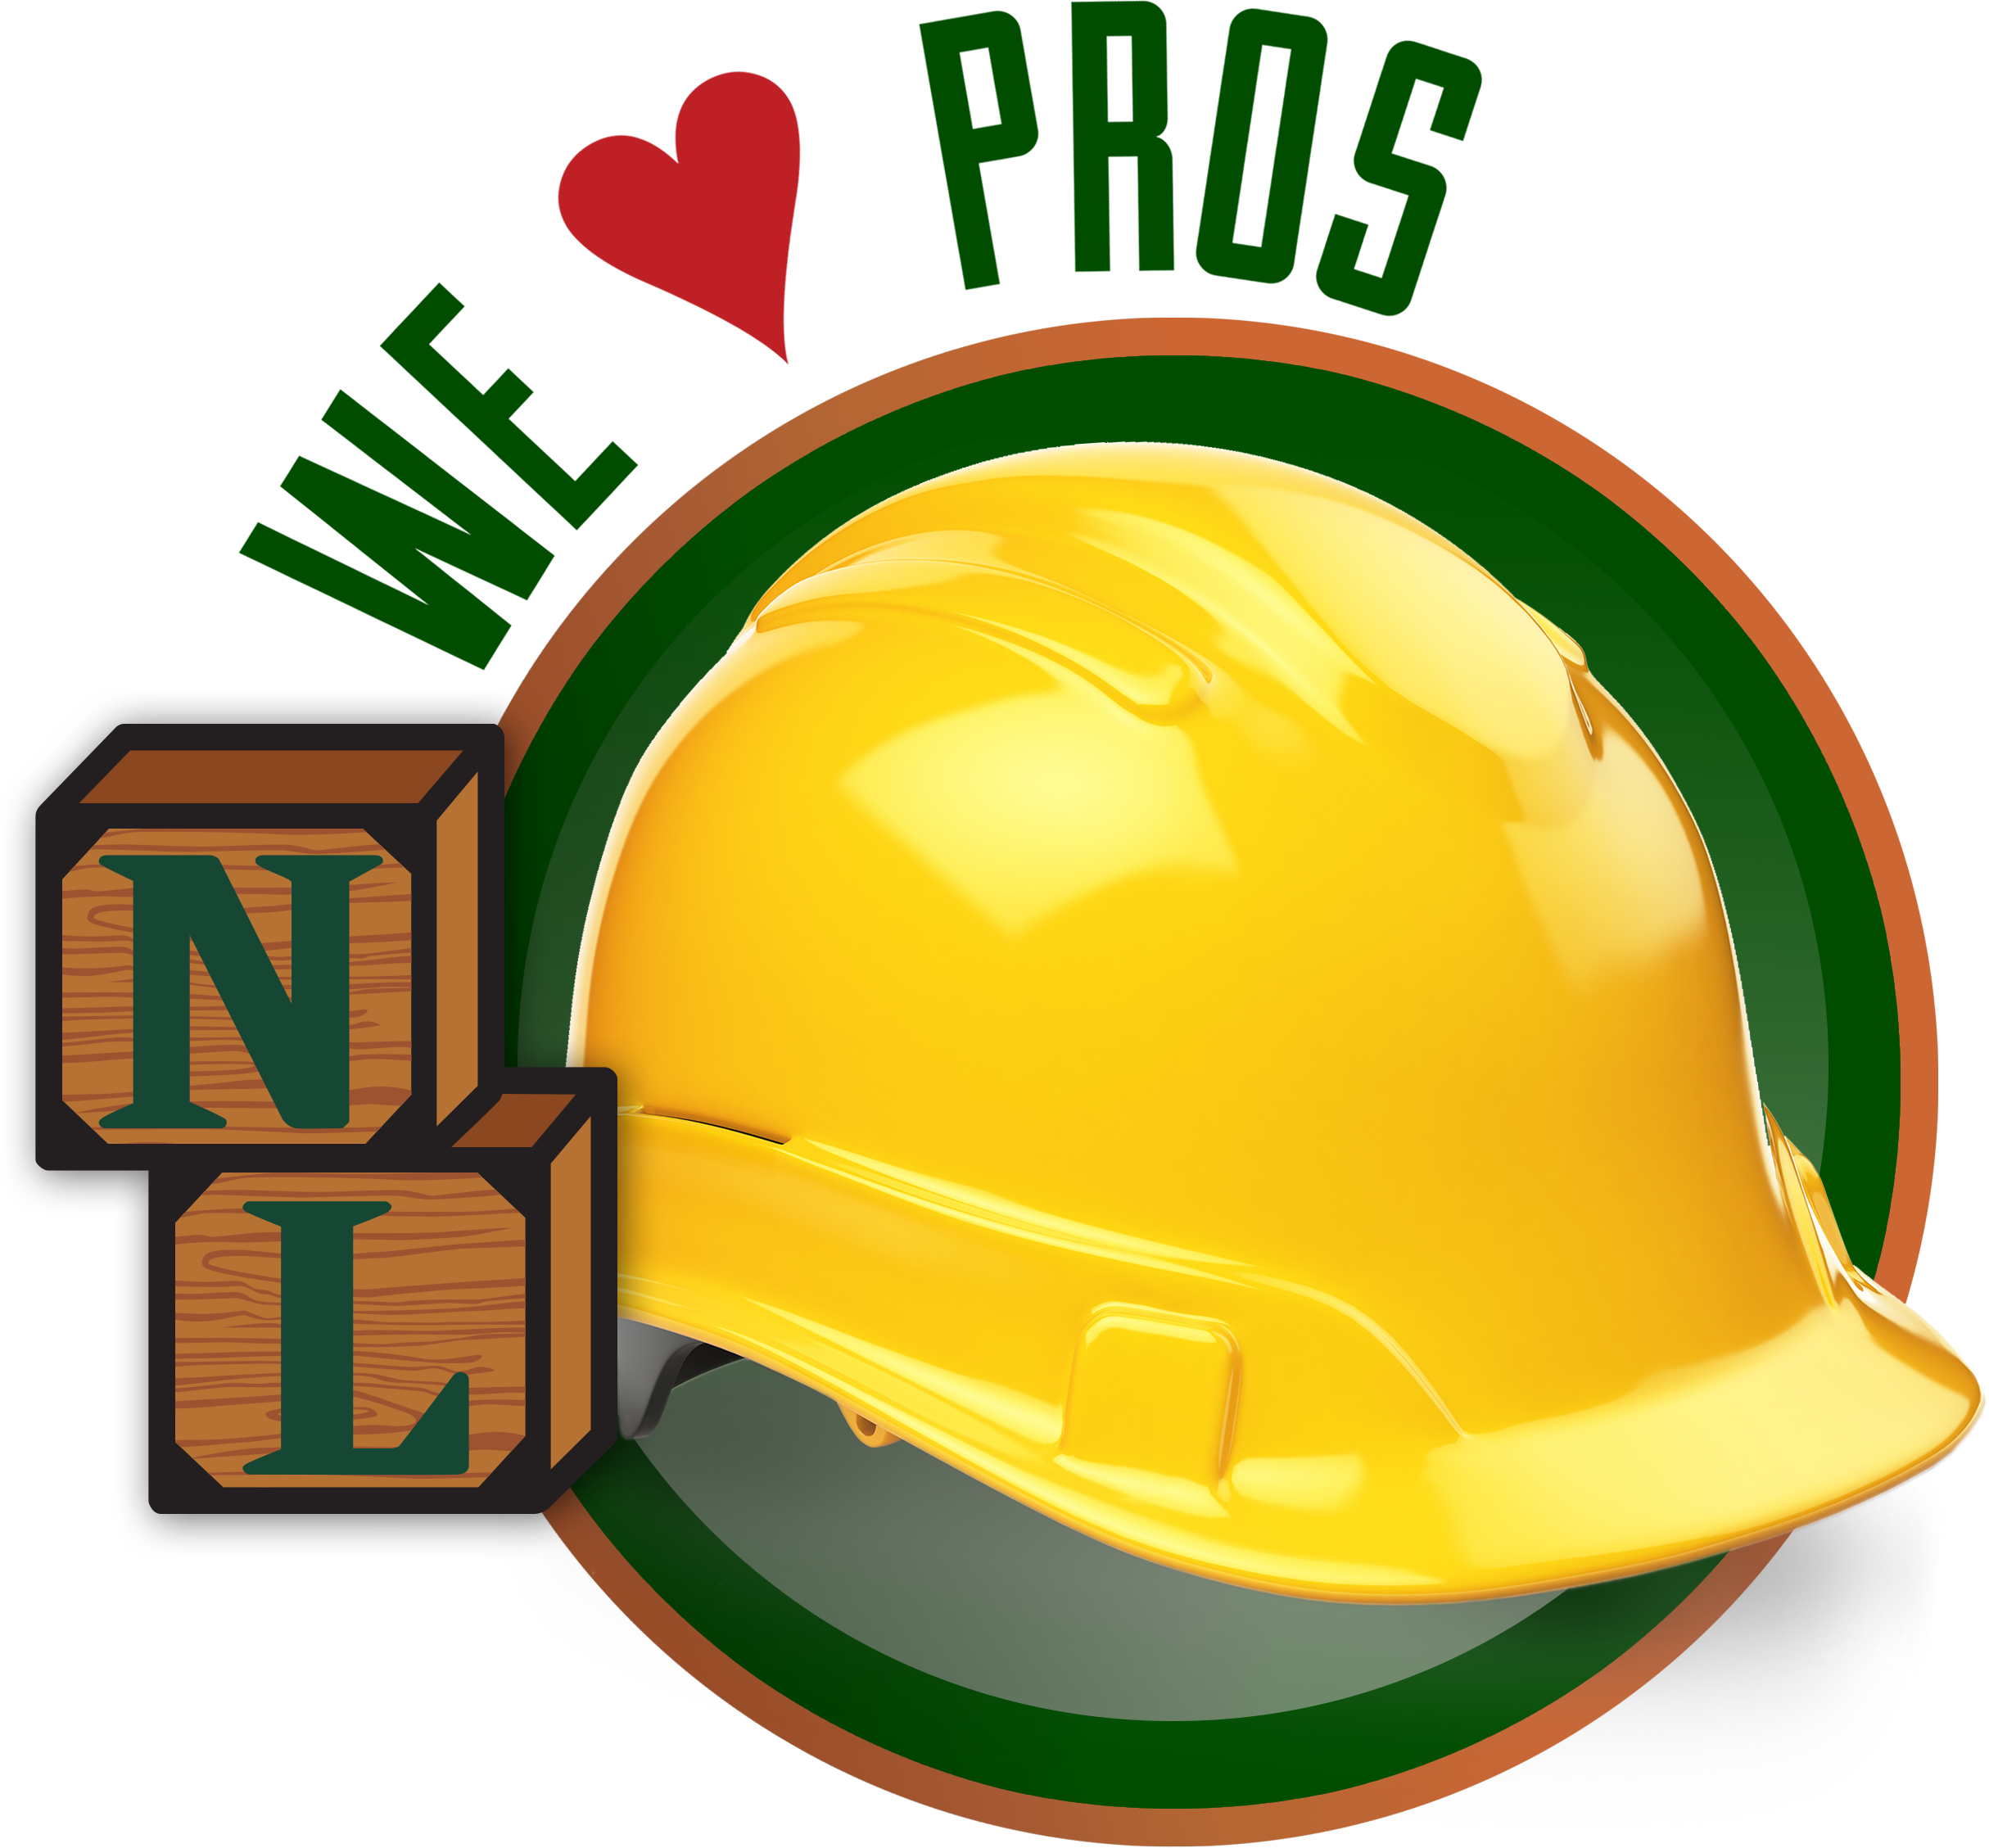 We 'heart' Pros Icon With Hard Hat - Trex Company, Inc. (2429x2257)